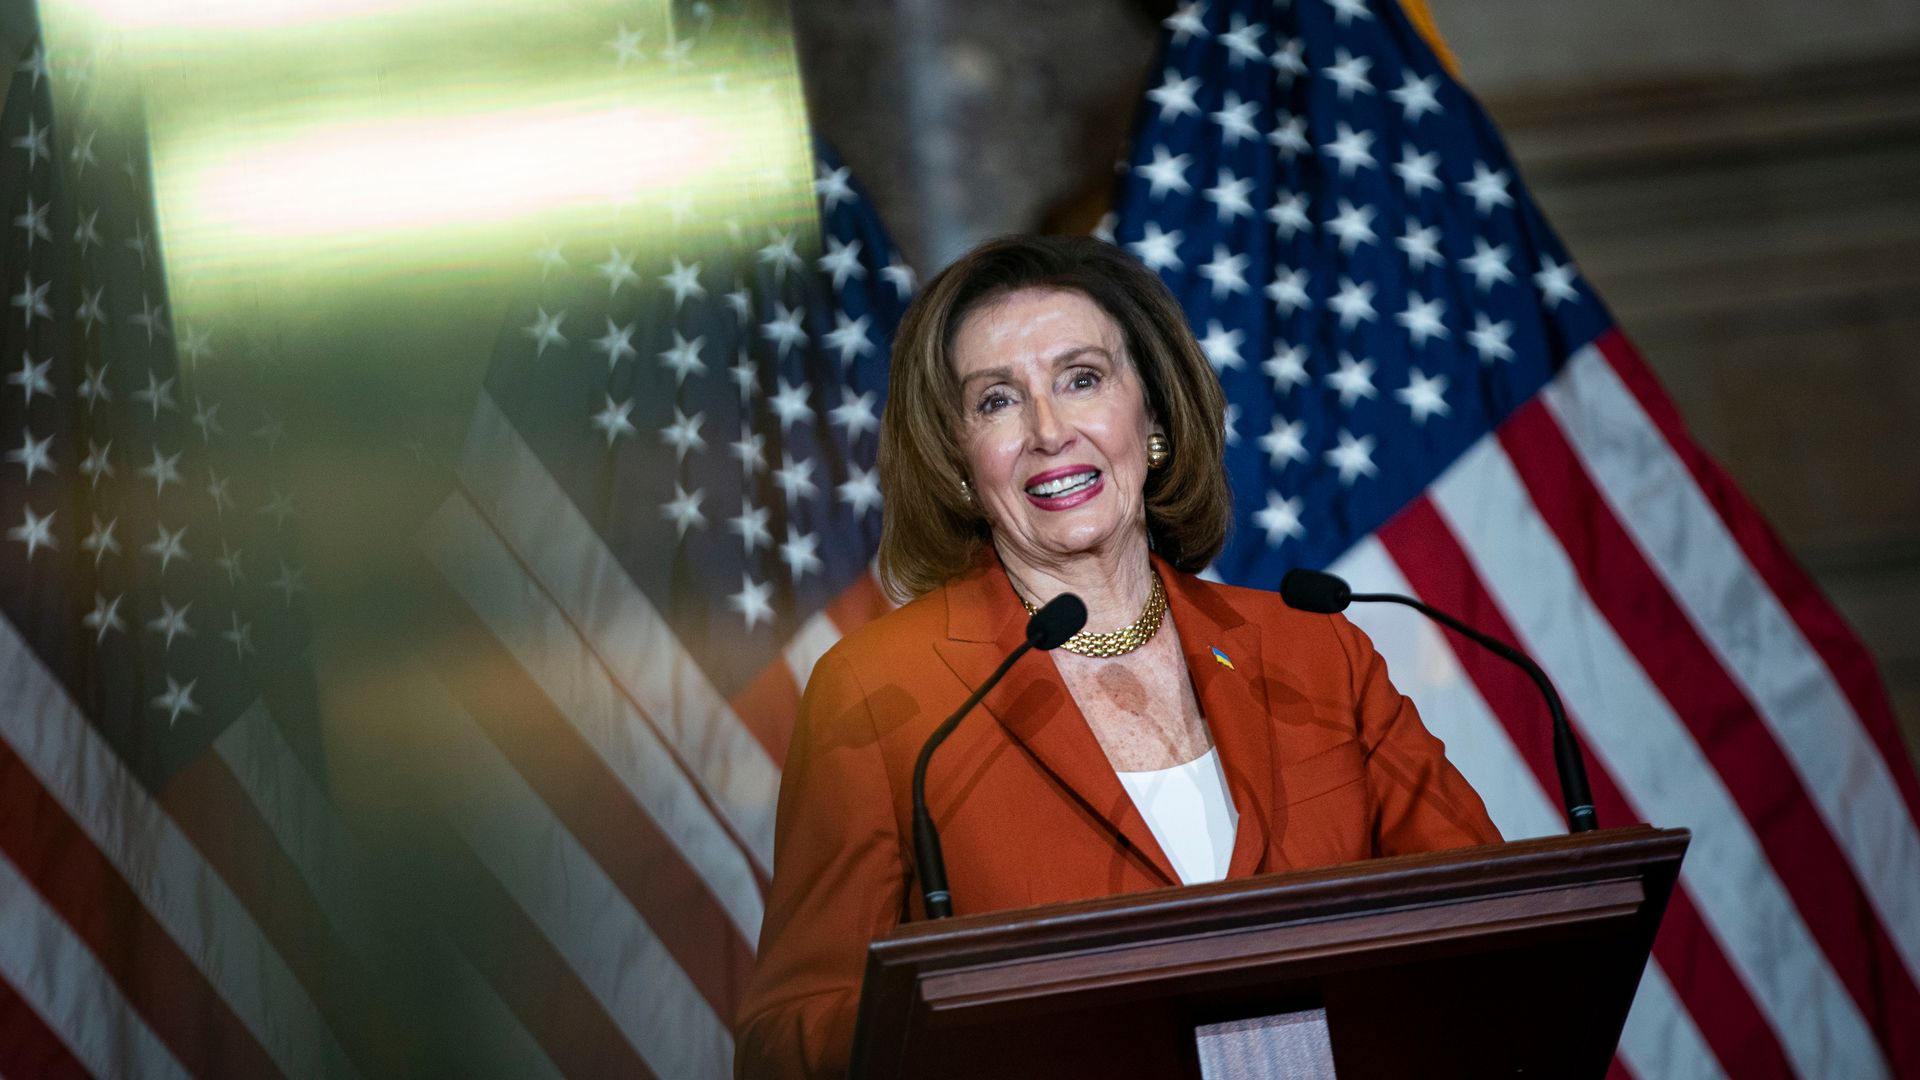 House Speaker Nancy Pelosi is seen at an event in the Capitol on Wednesday.